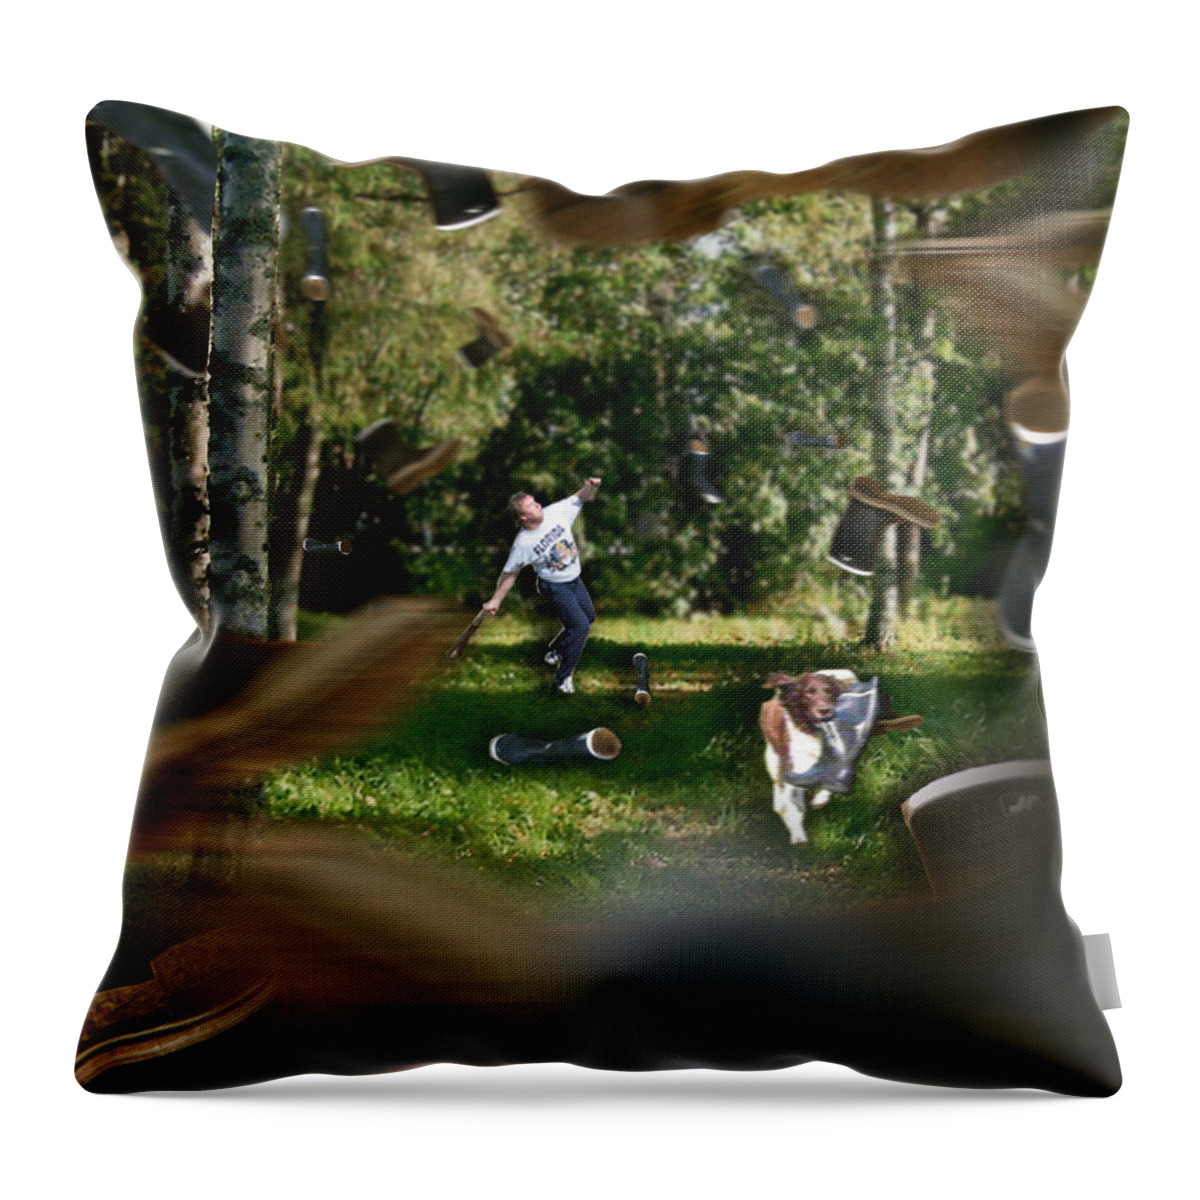 Boots Throw Pillow featuring the digital art Having Fun by Laila Talley